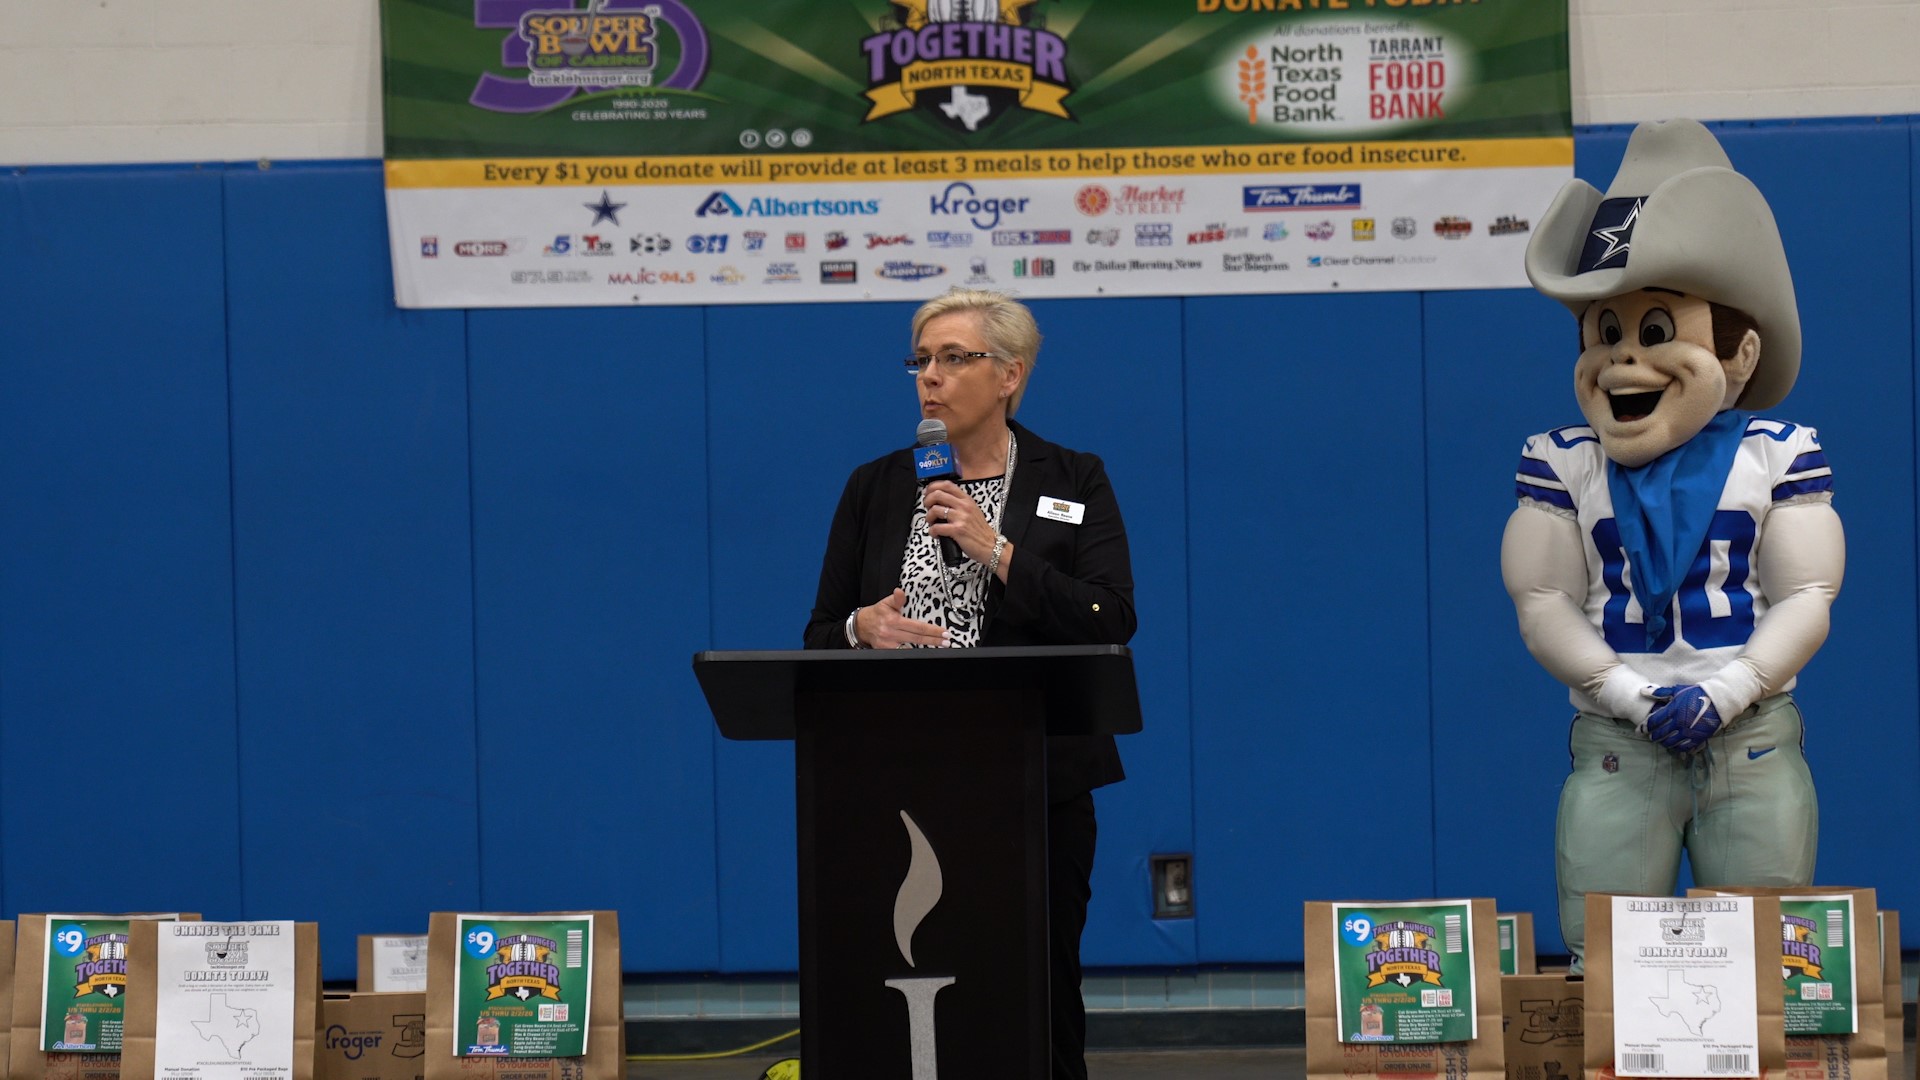 Souper Bowl of Caring celebrates its 30th anniversary with the 2020 North Texas Kick Off at Nimitz High School In Irving.